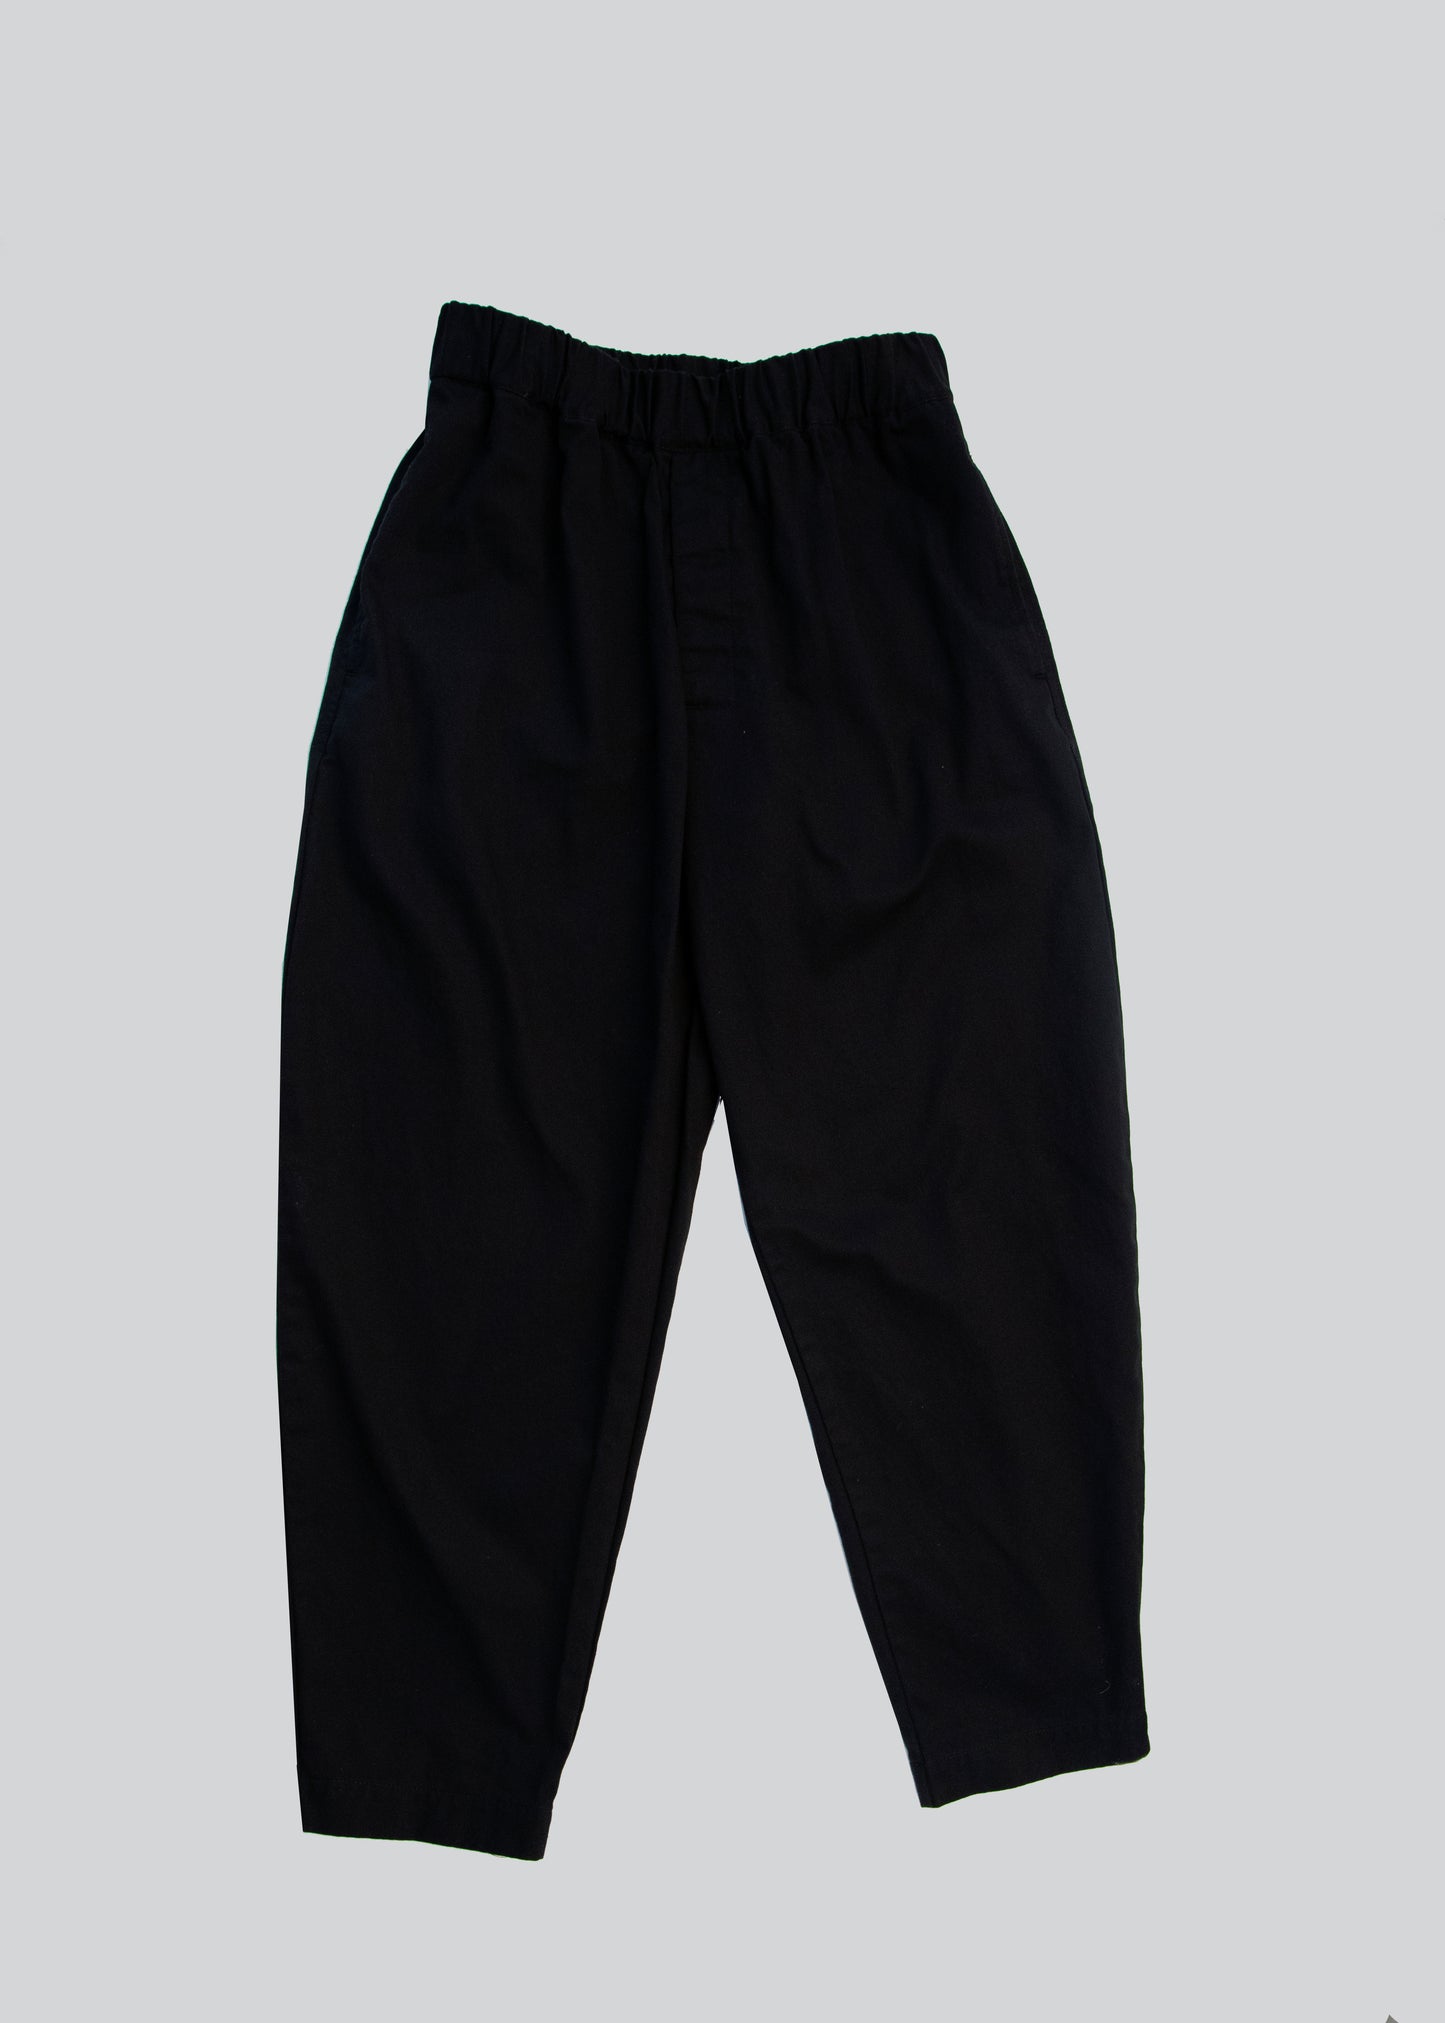 Front flat lay of gathered pants in color black